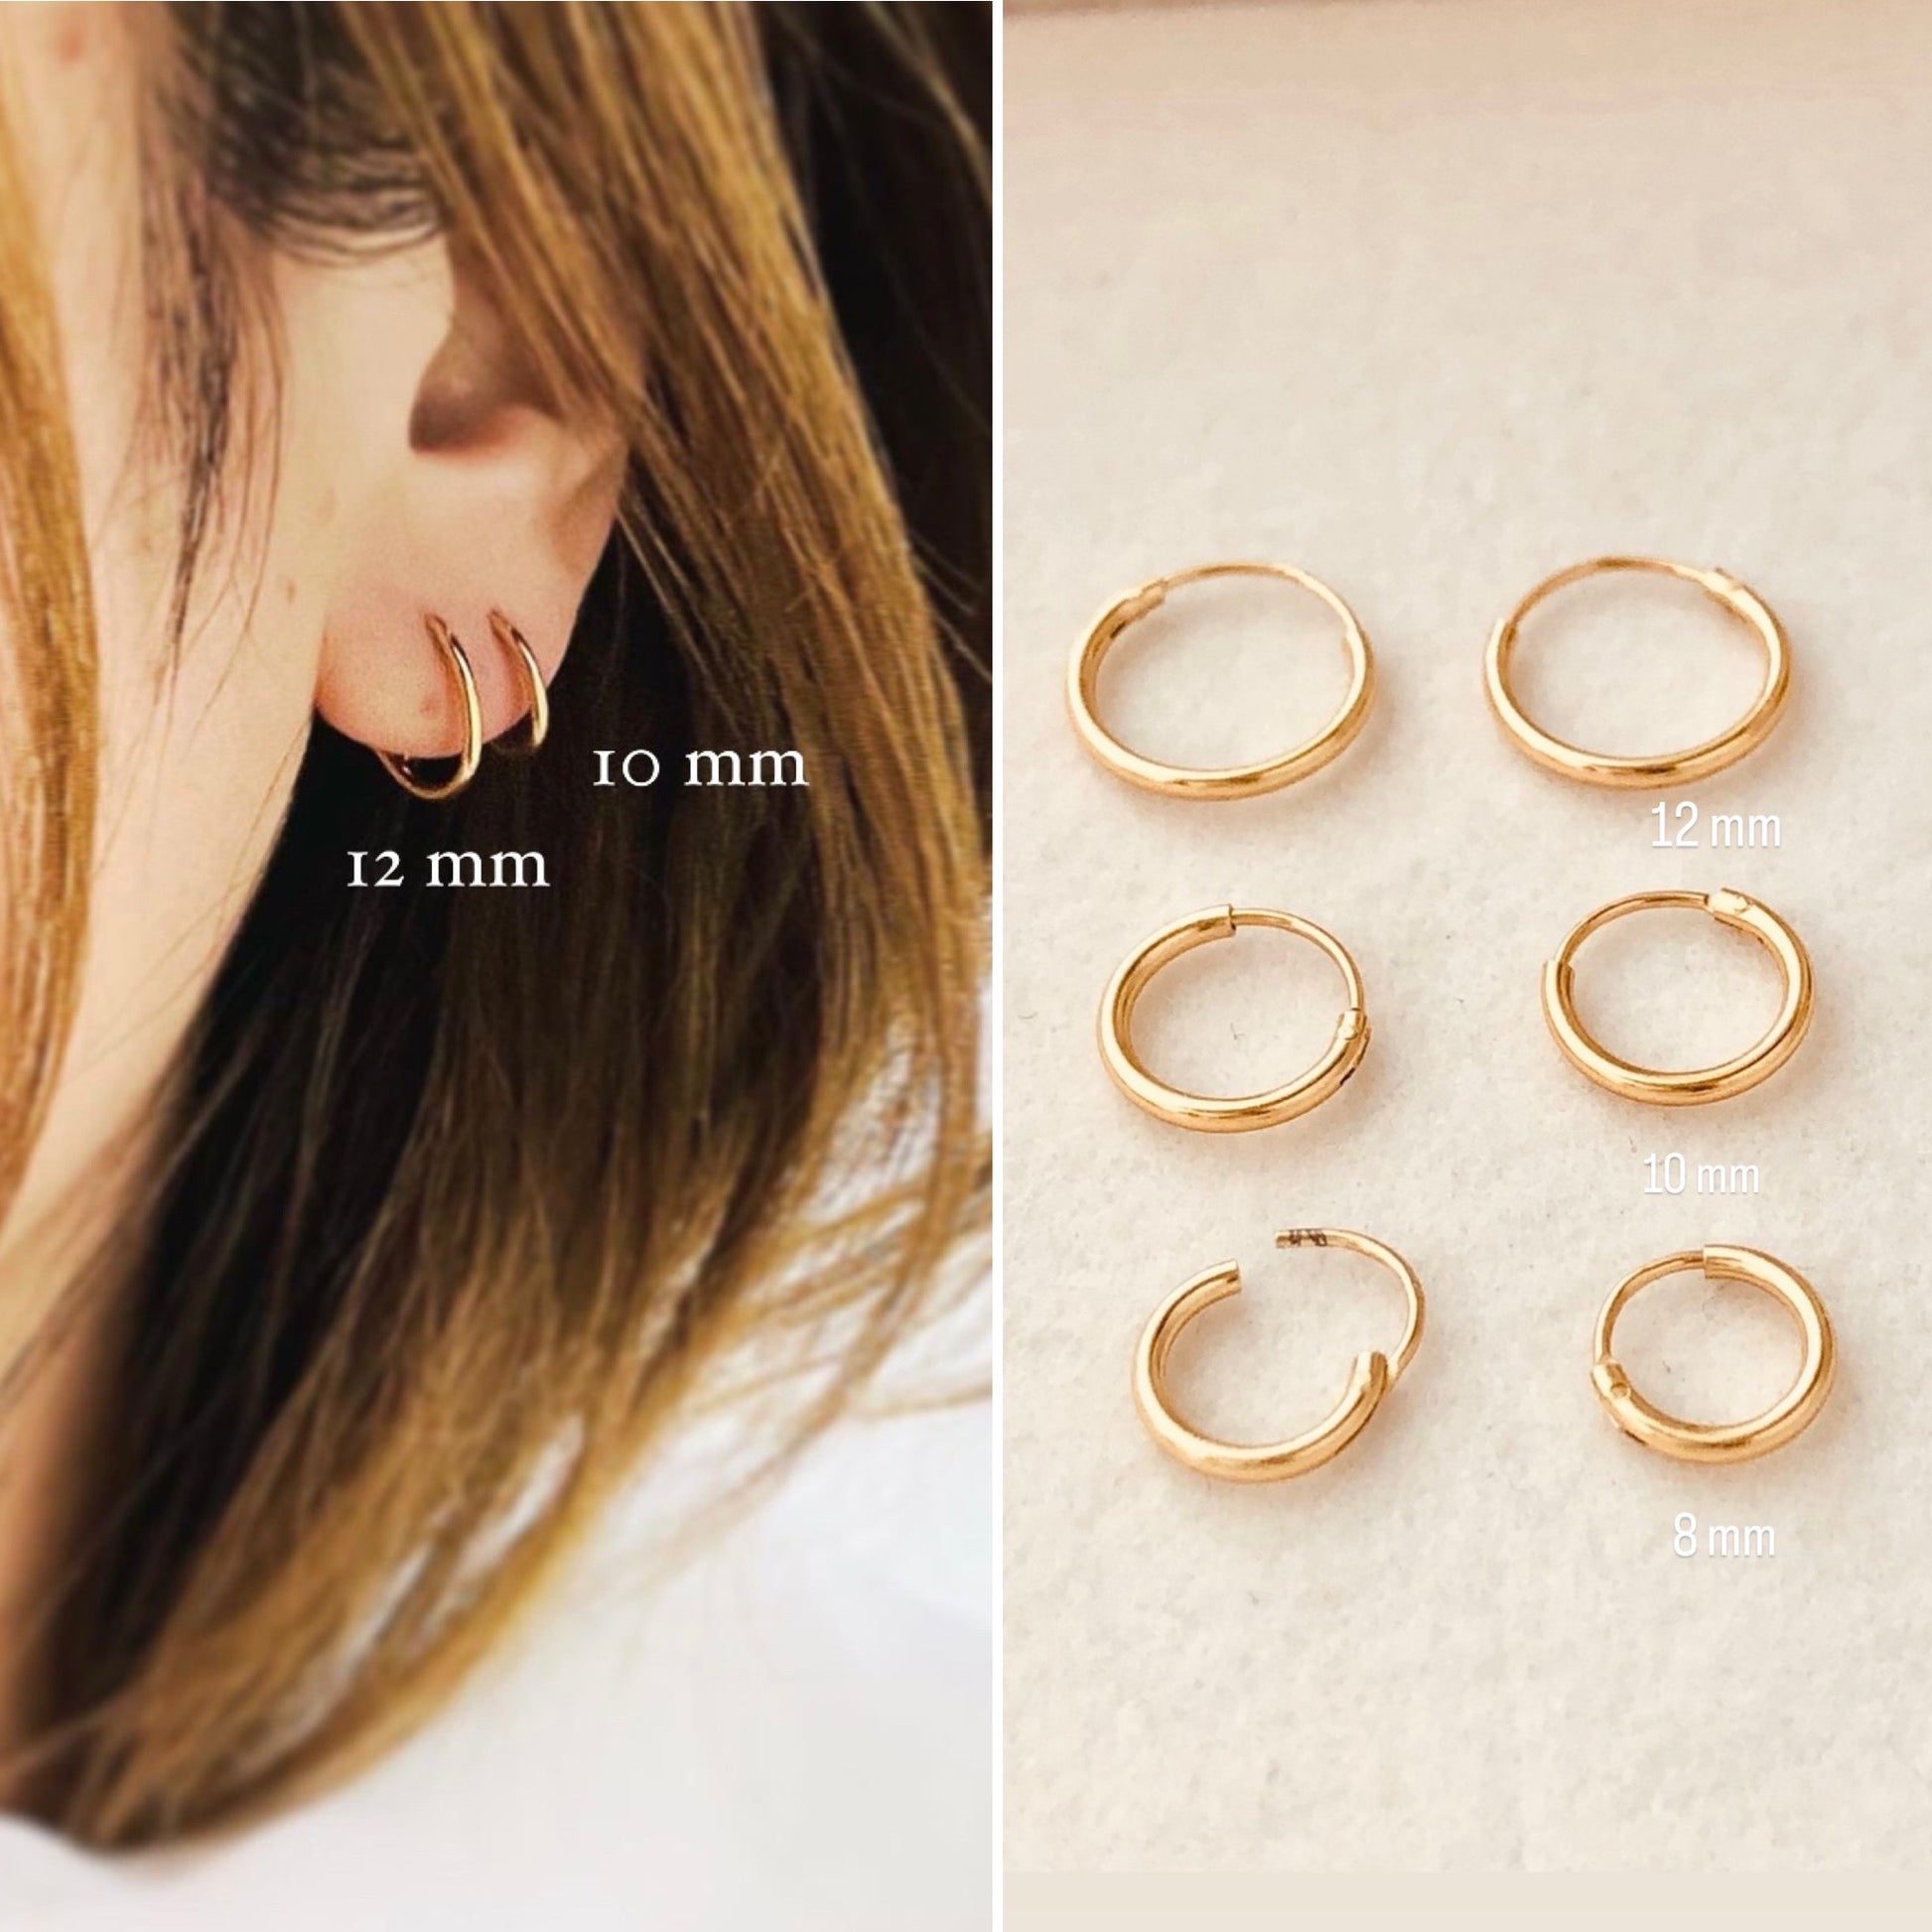 Guide to Earring Sizes